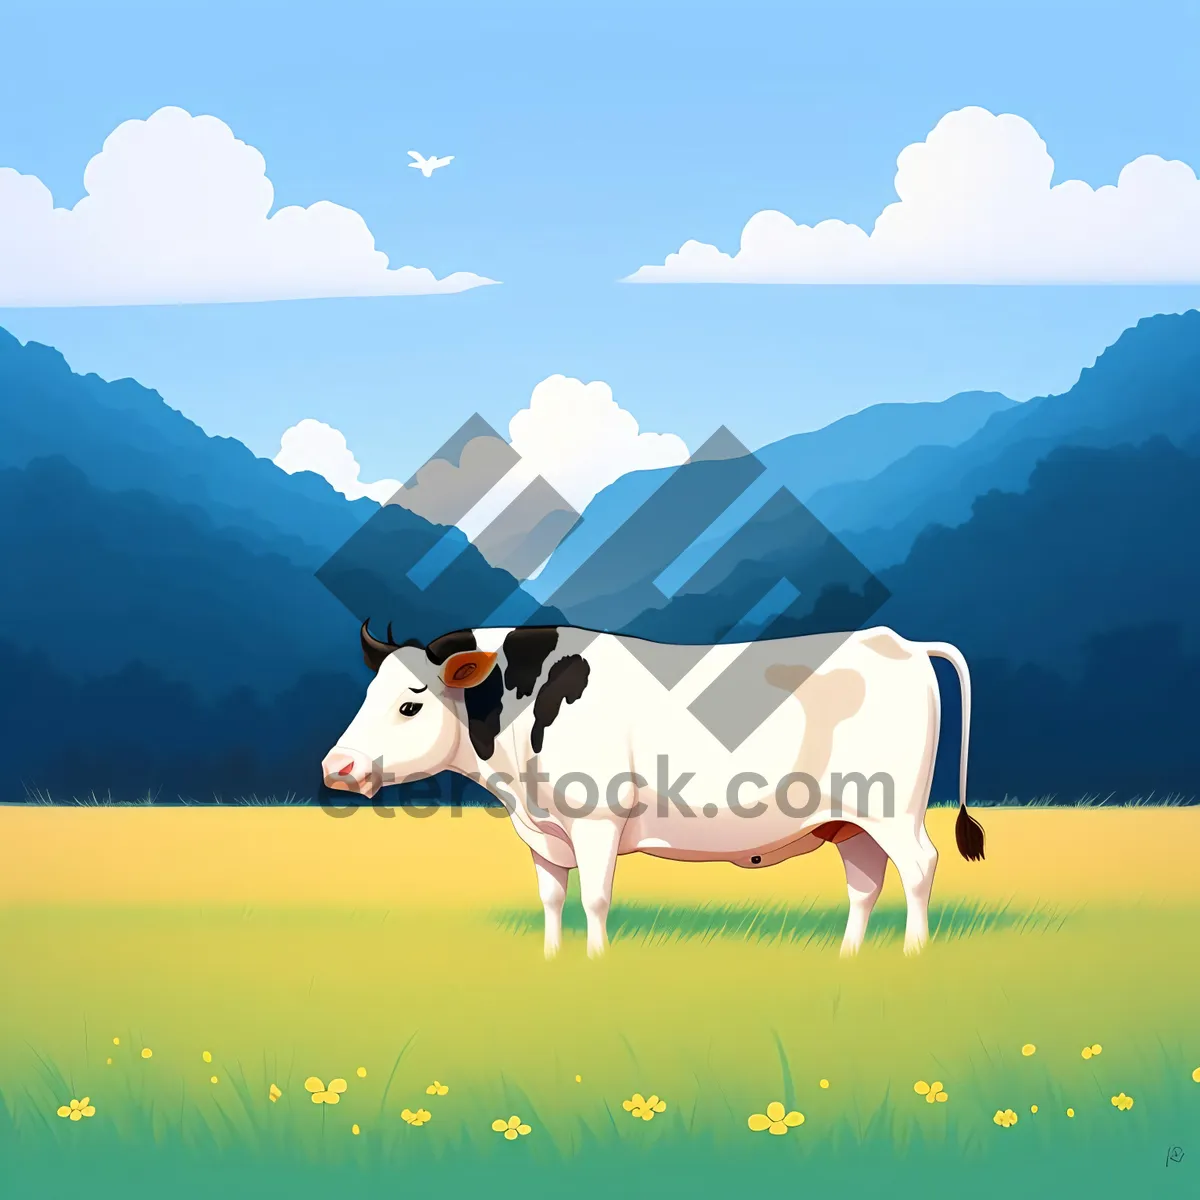 Picture of Summer Grazing: Cows Roaming Freely in a Picturesque Rural Landscape